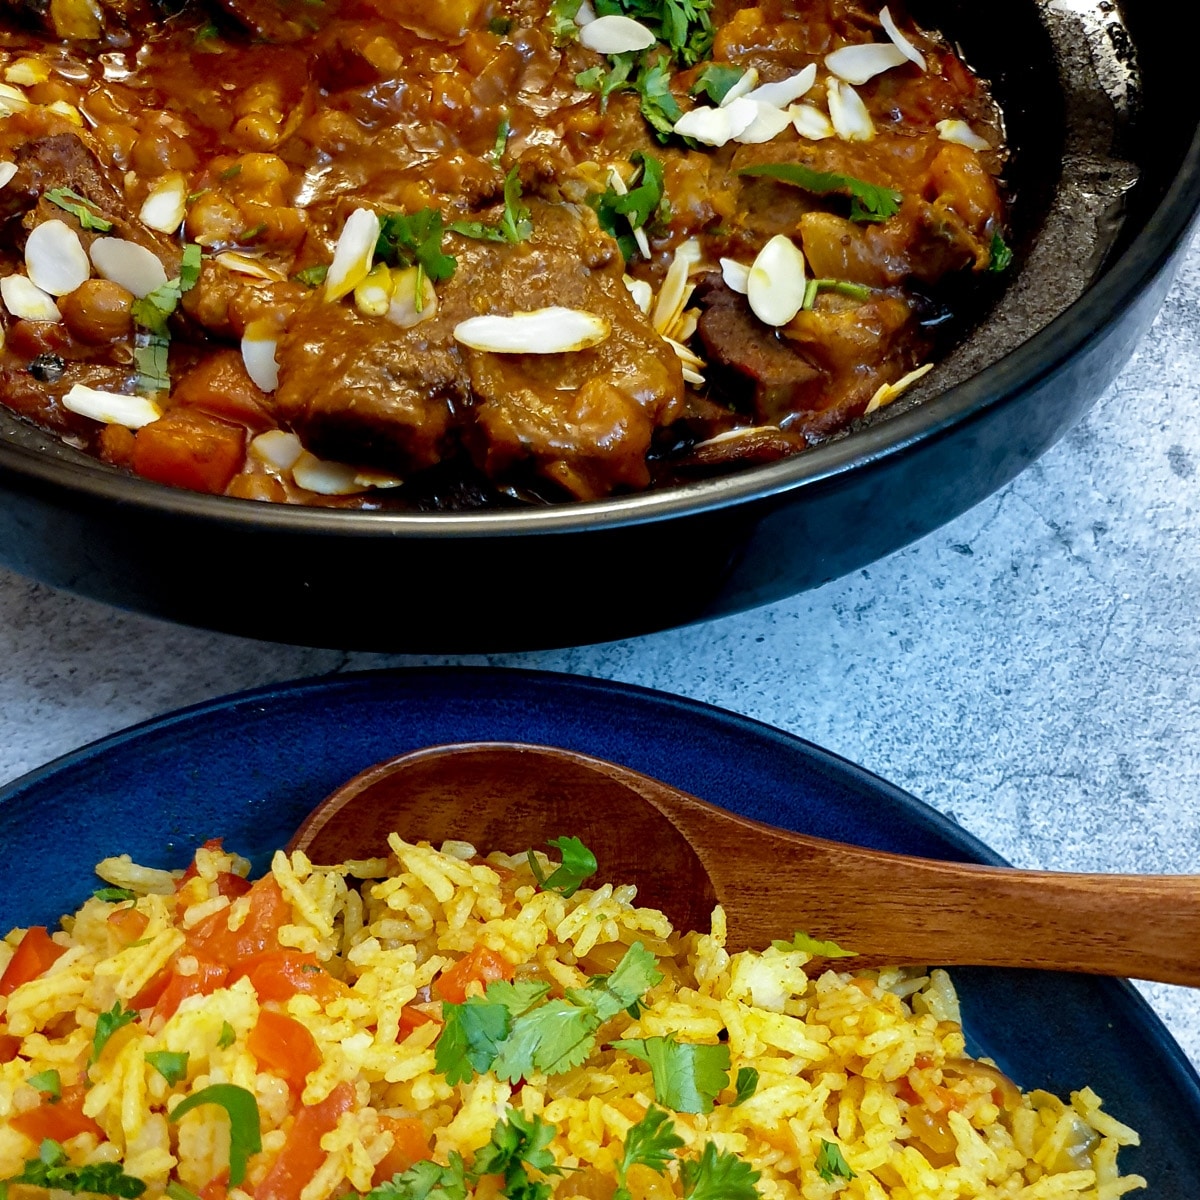 A tagine filled with Moroccan lamb stew next to a bowl of spicy rice.